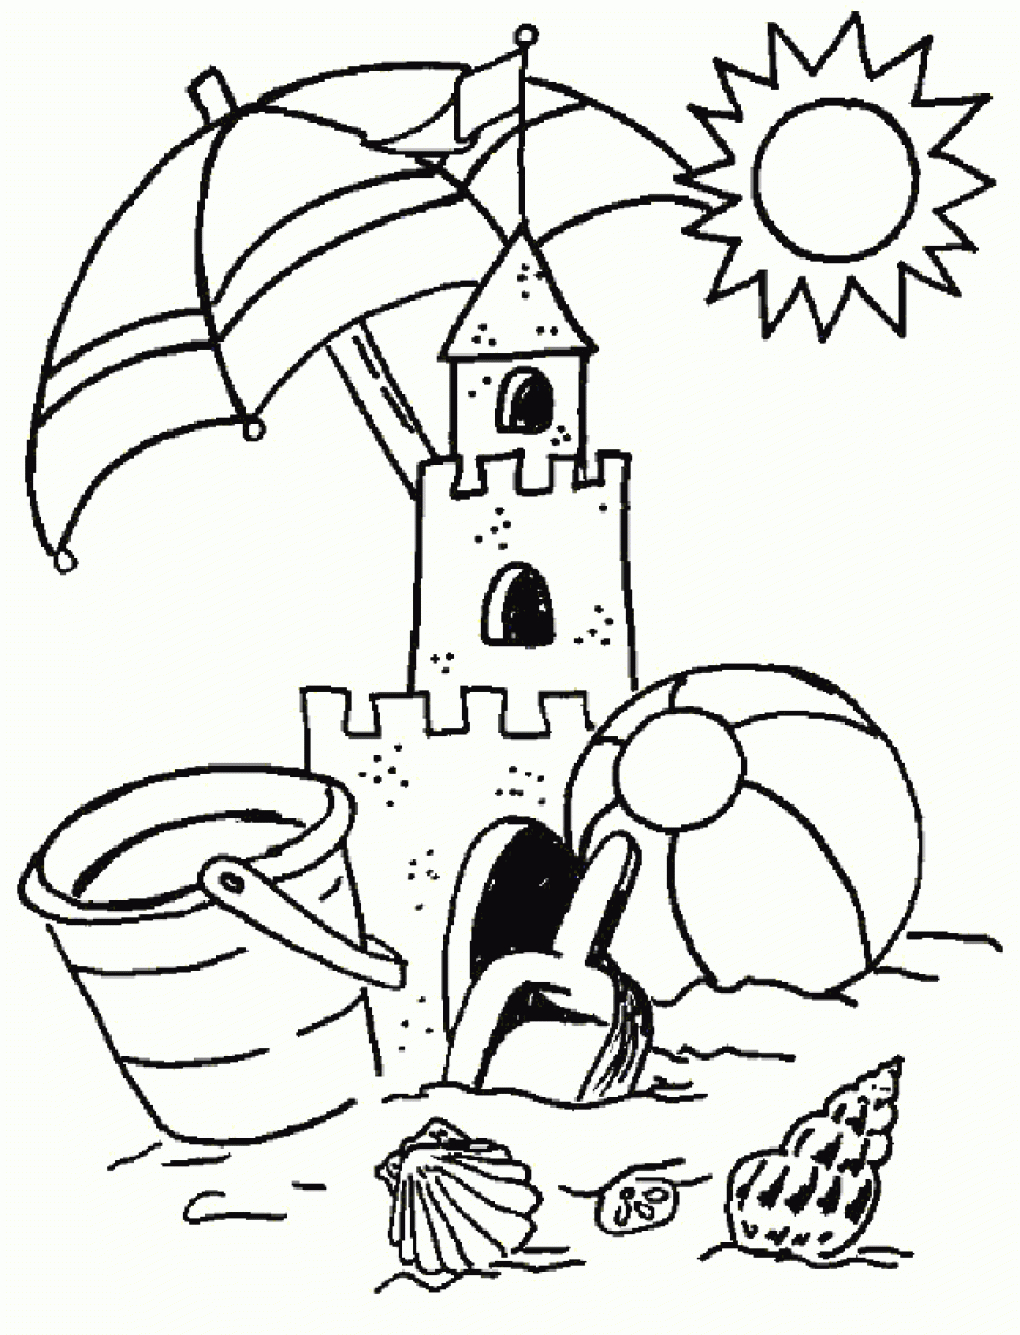 Summer Coloring Pages To Download And Print For Free | Coloring - Free Printable Summer Coloring Pages